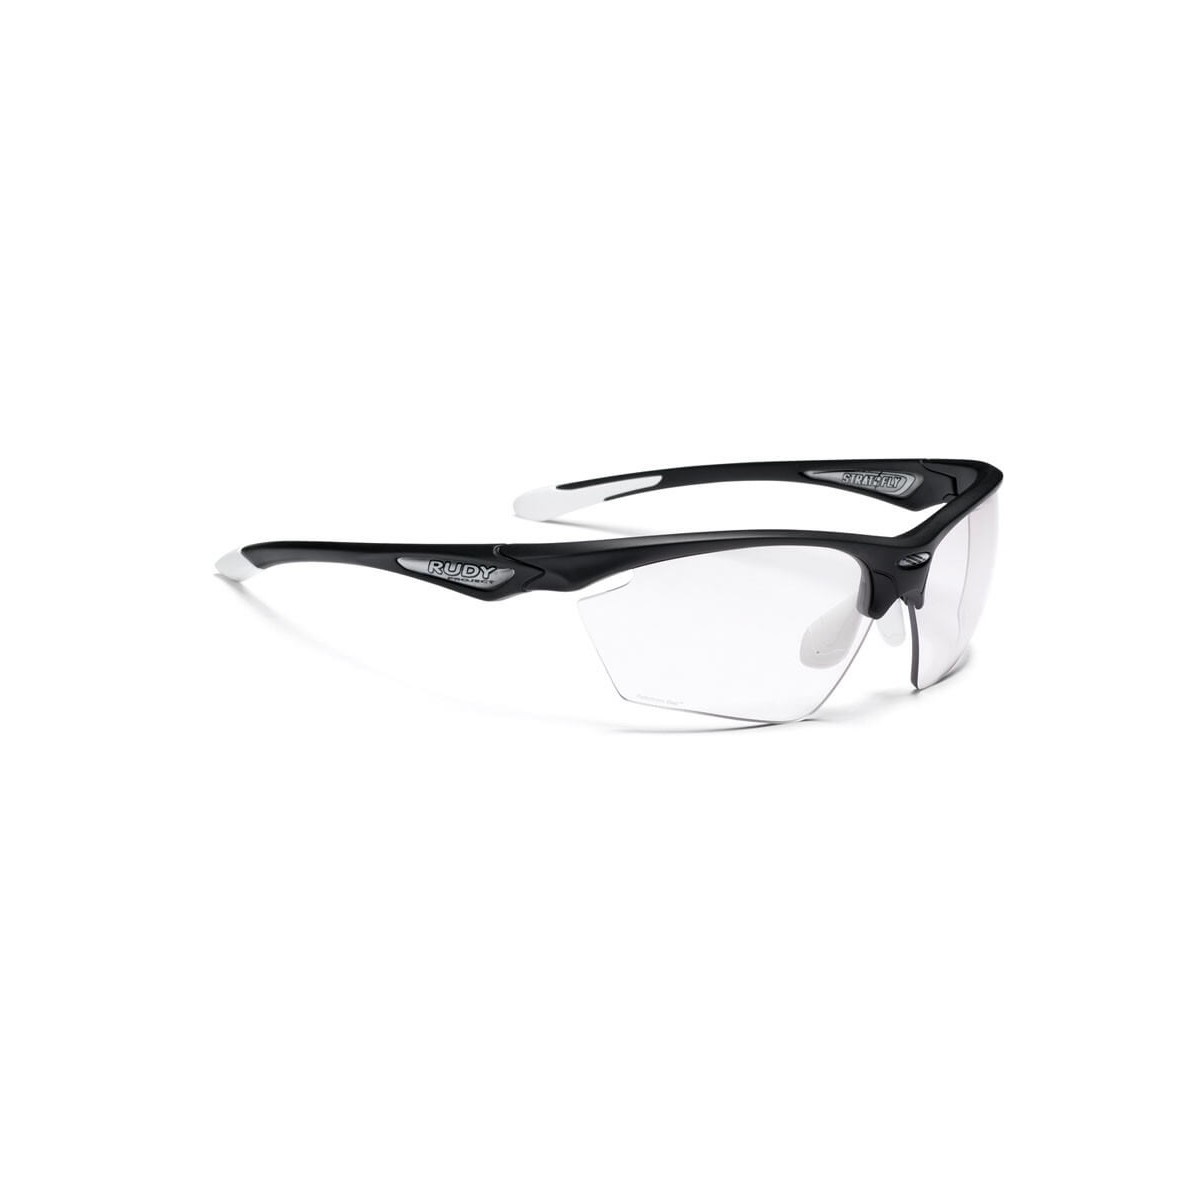 Of S  günstig Kaufen-Brille Stratofly Black Gloss RPO Photoclear Rudy Project. Brille Stratofly Black Gloss RPO Photoclear Rudy Project . 